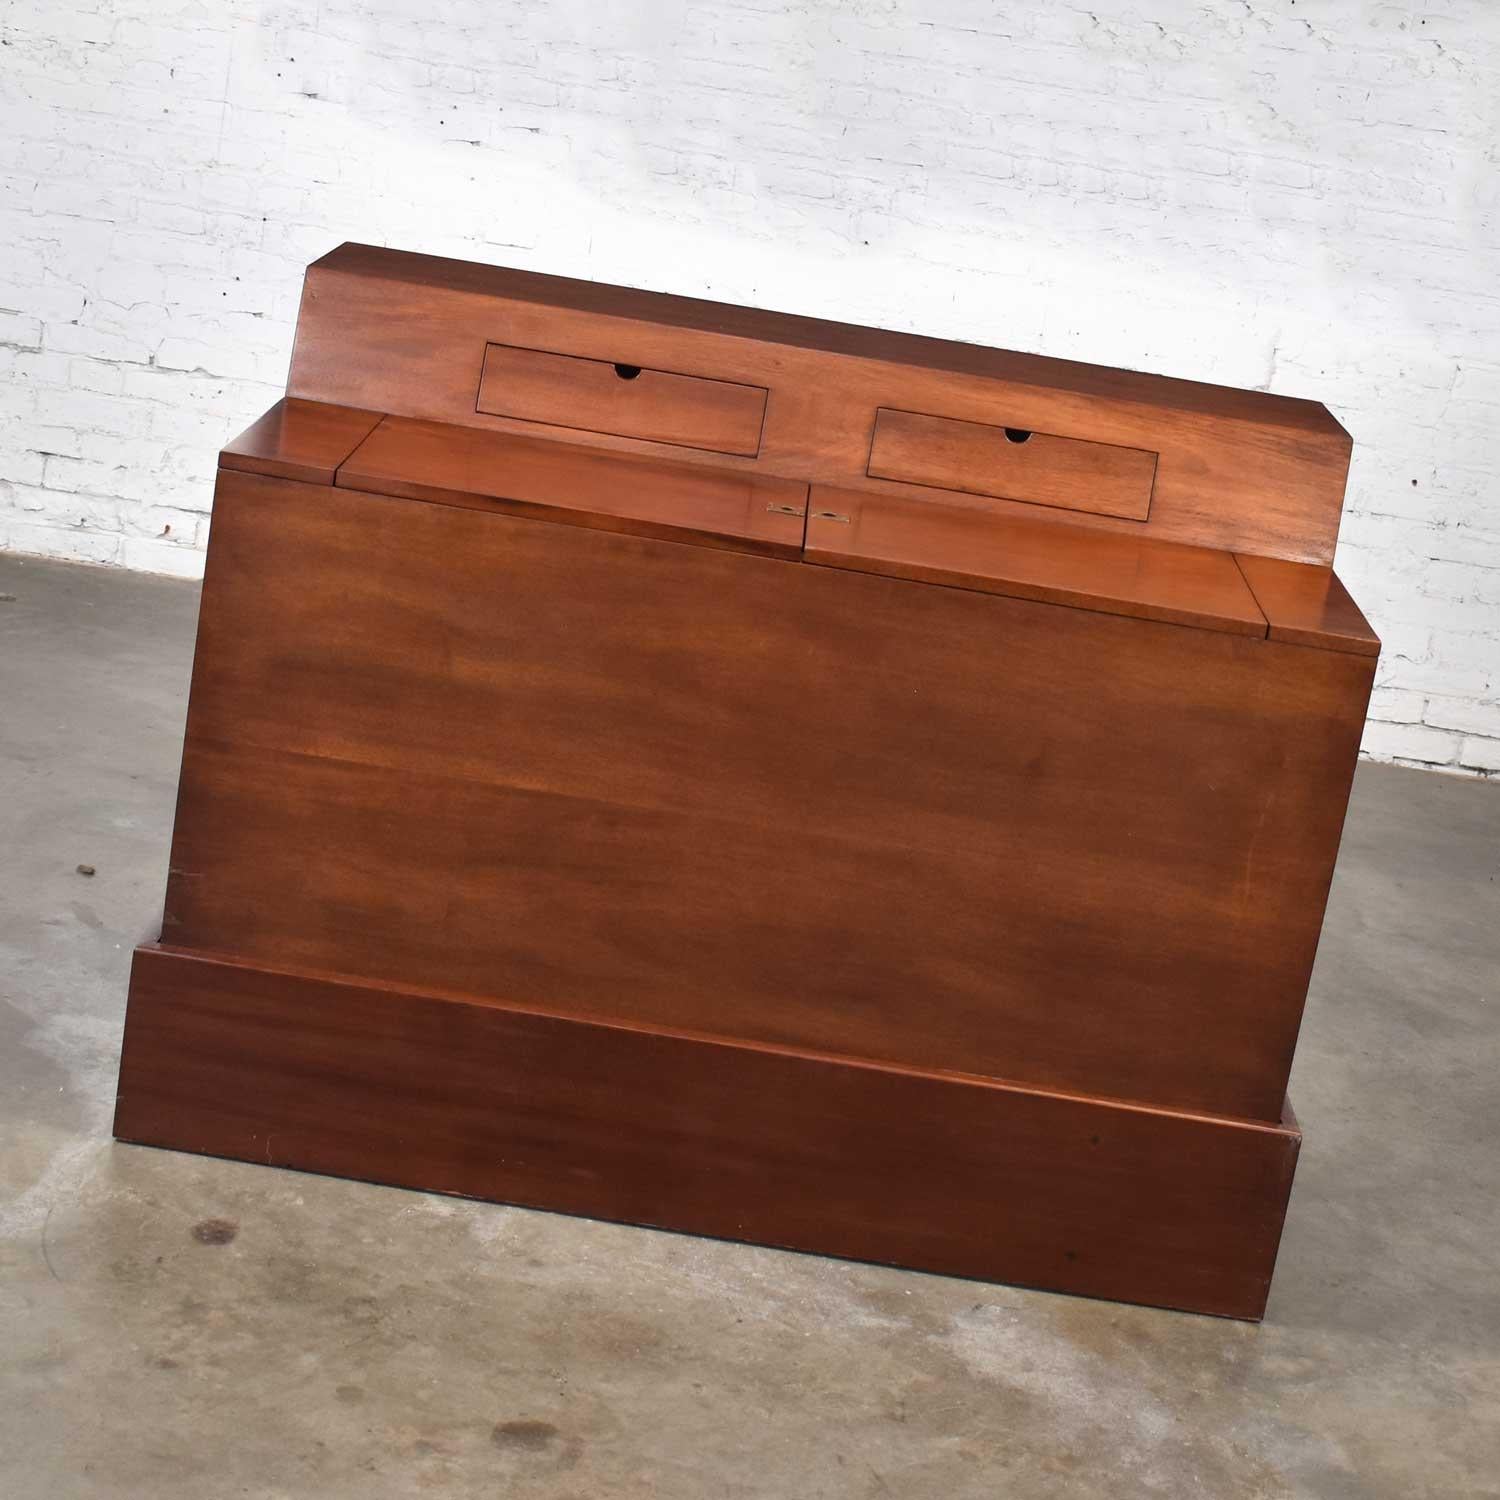 20th Century Art Deco Style Mahogany Entry Desk or Bar by IMA S.A. Bogota, Colombia For Sale